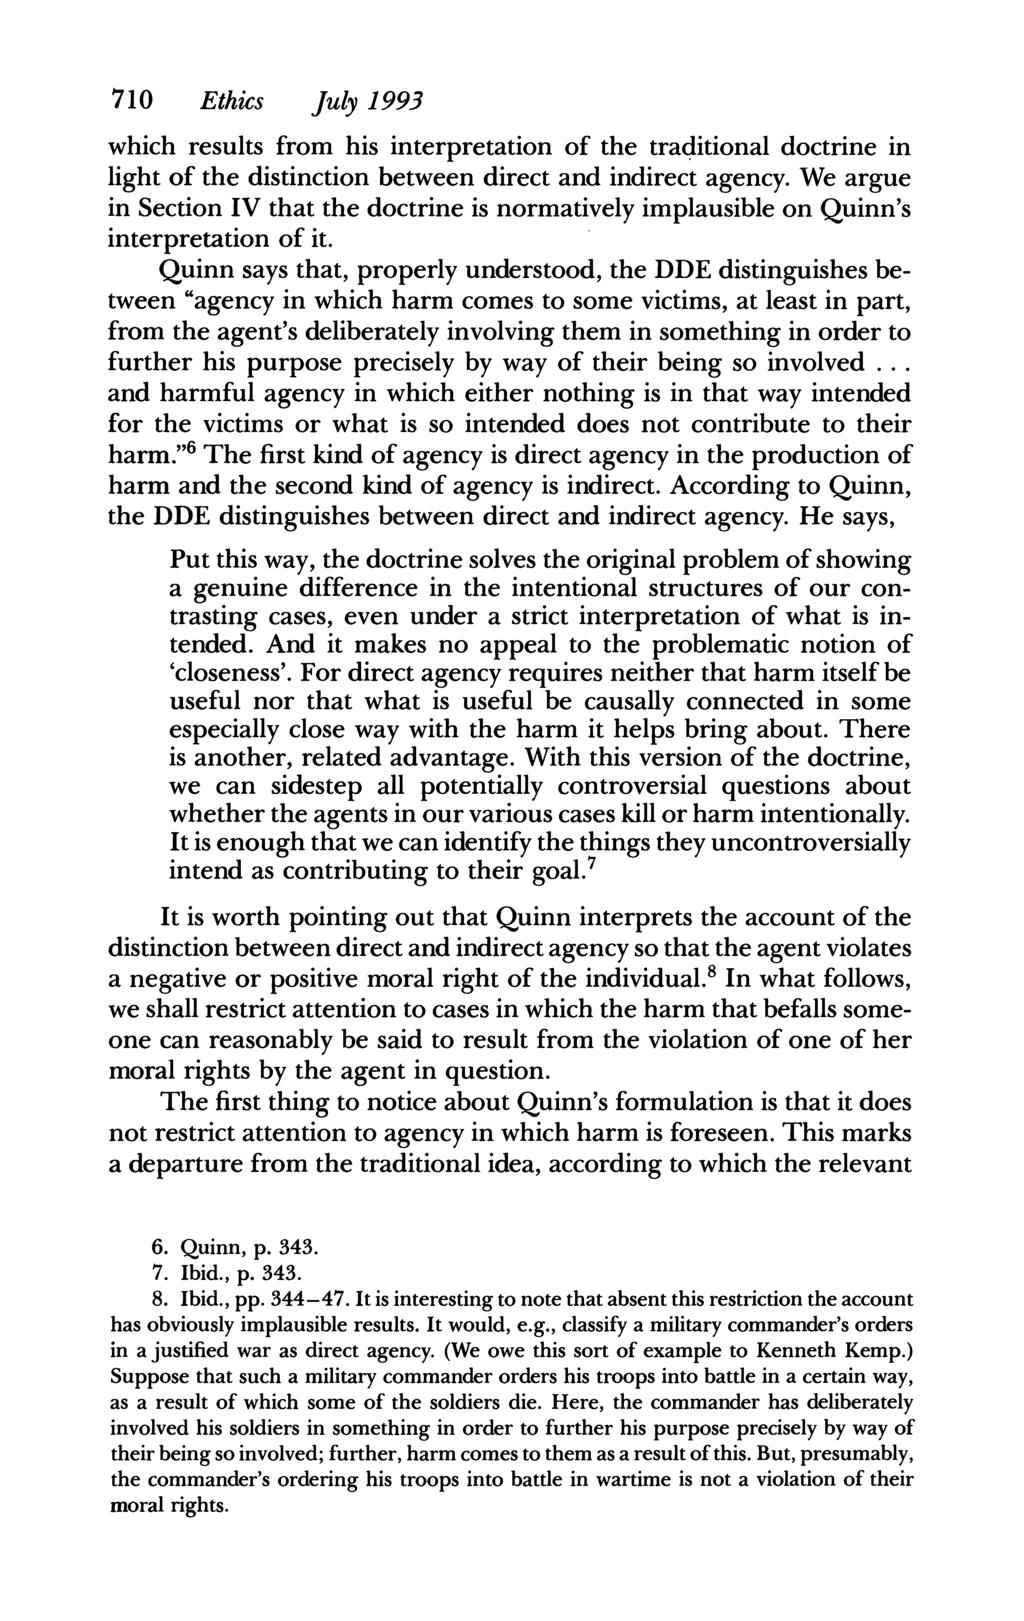 710 Ethics July 1993 which results from his interpretation of the traditional doctrine in light of the distinction between direct and indirect agency.